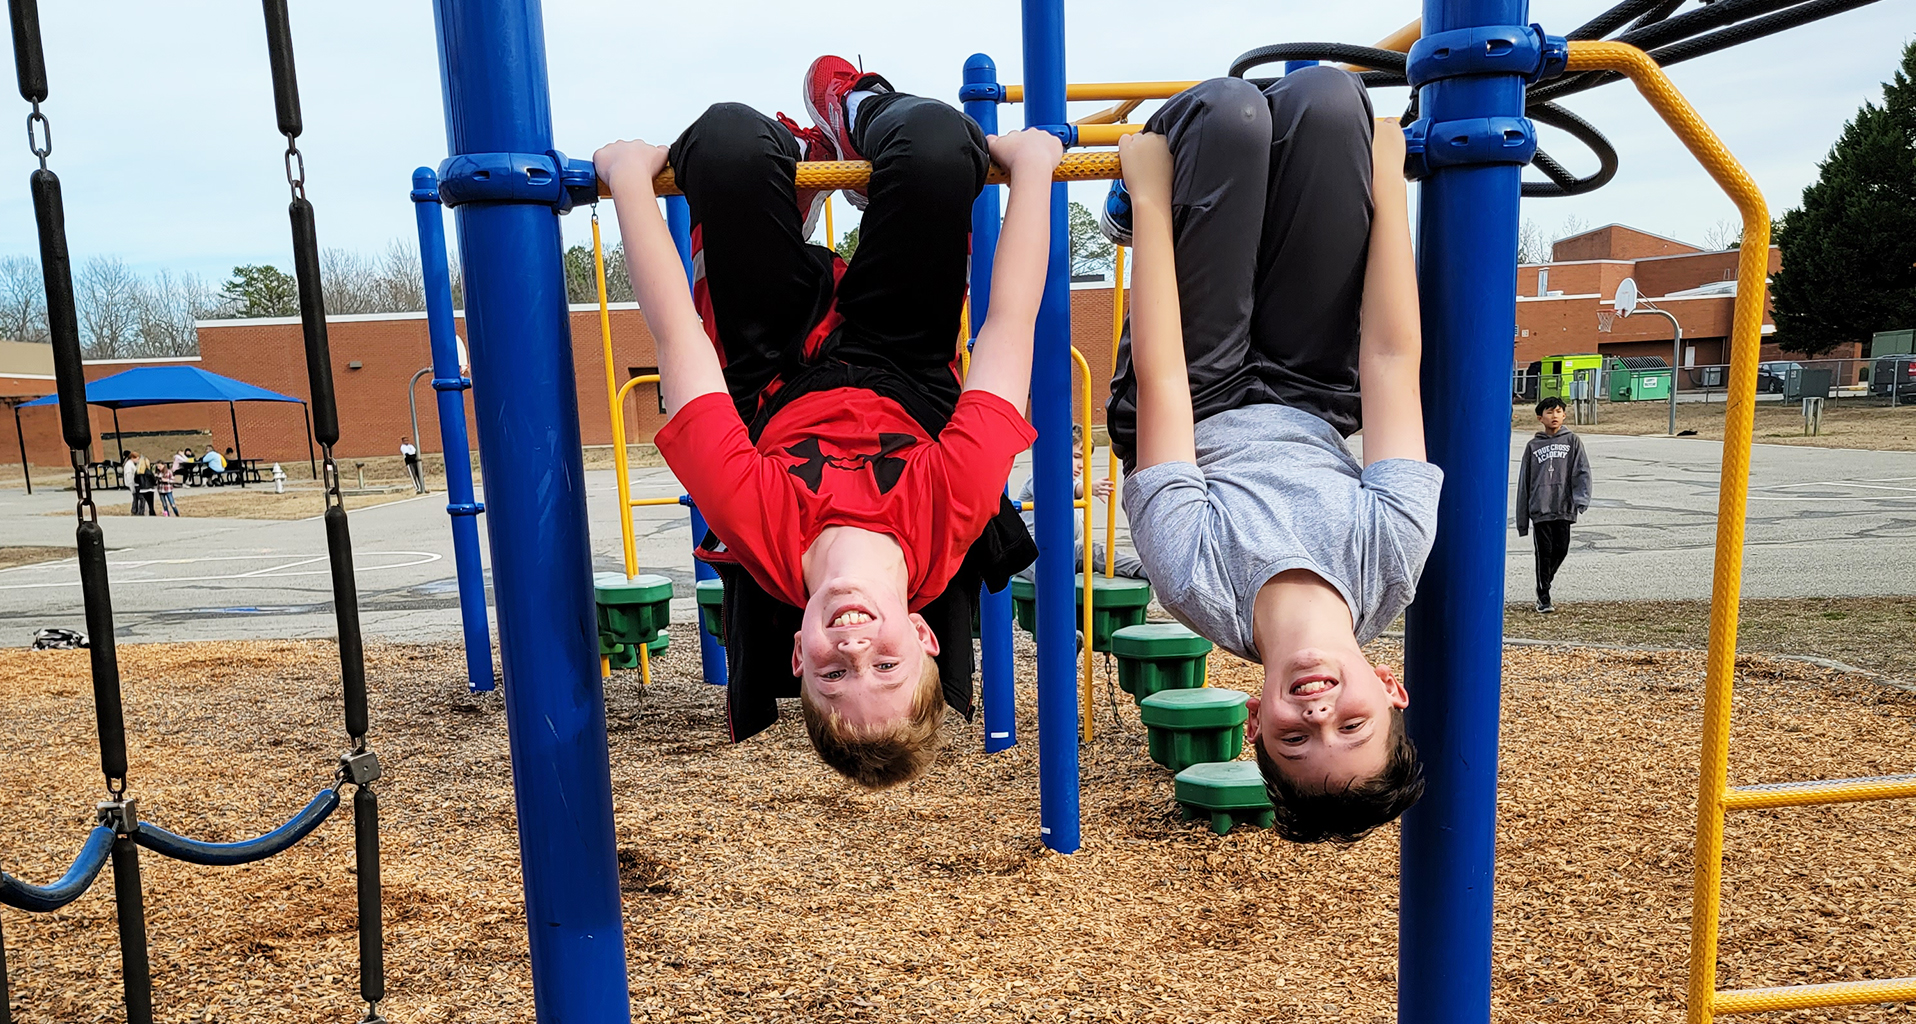 Two students hang upside-down on playground